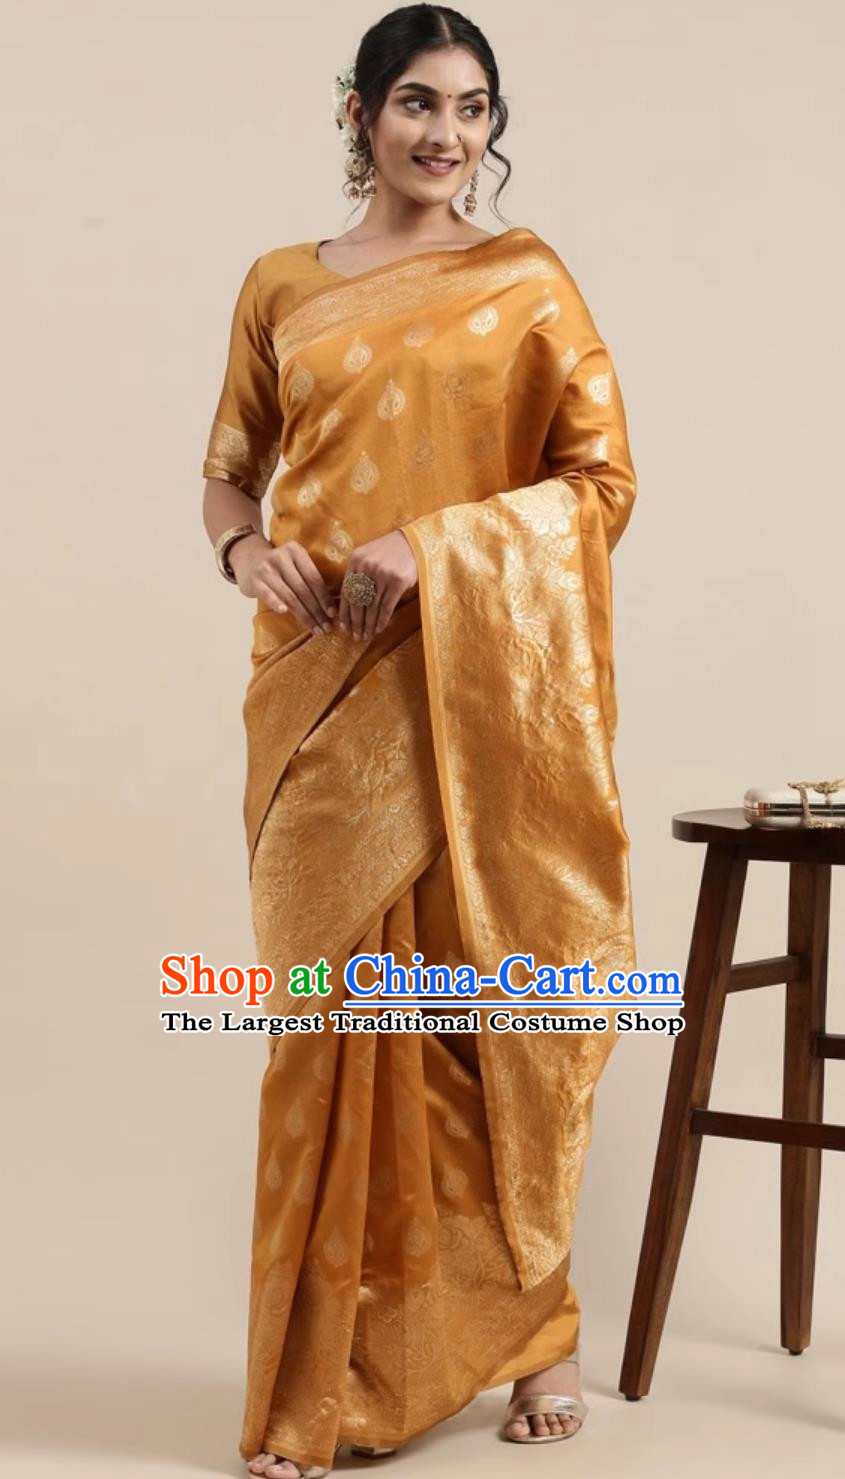 India Festival Clothing National Costume Traditional Ginger Dress Indian Woman Sari